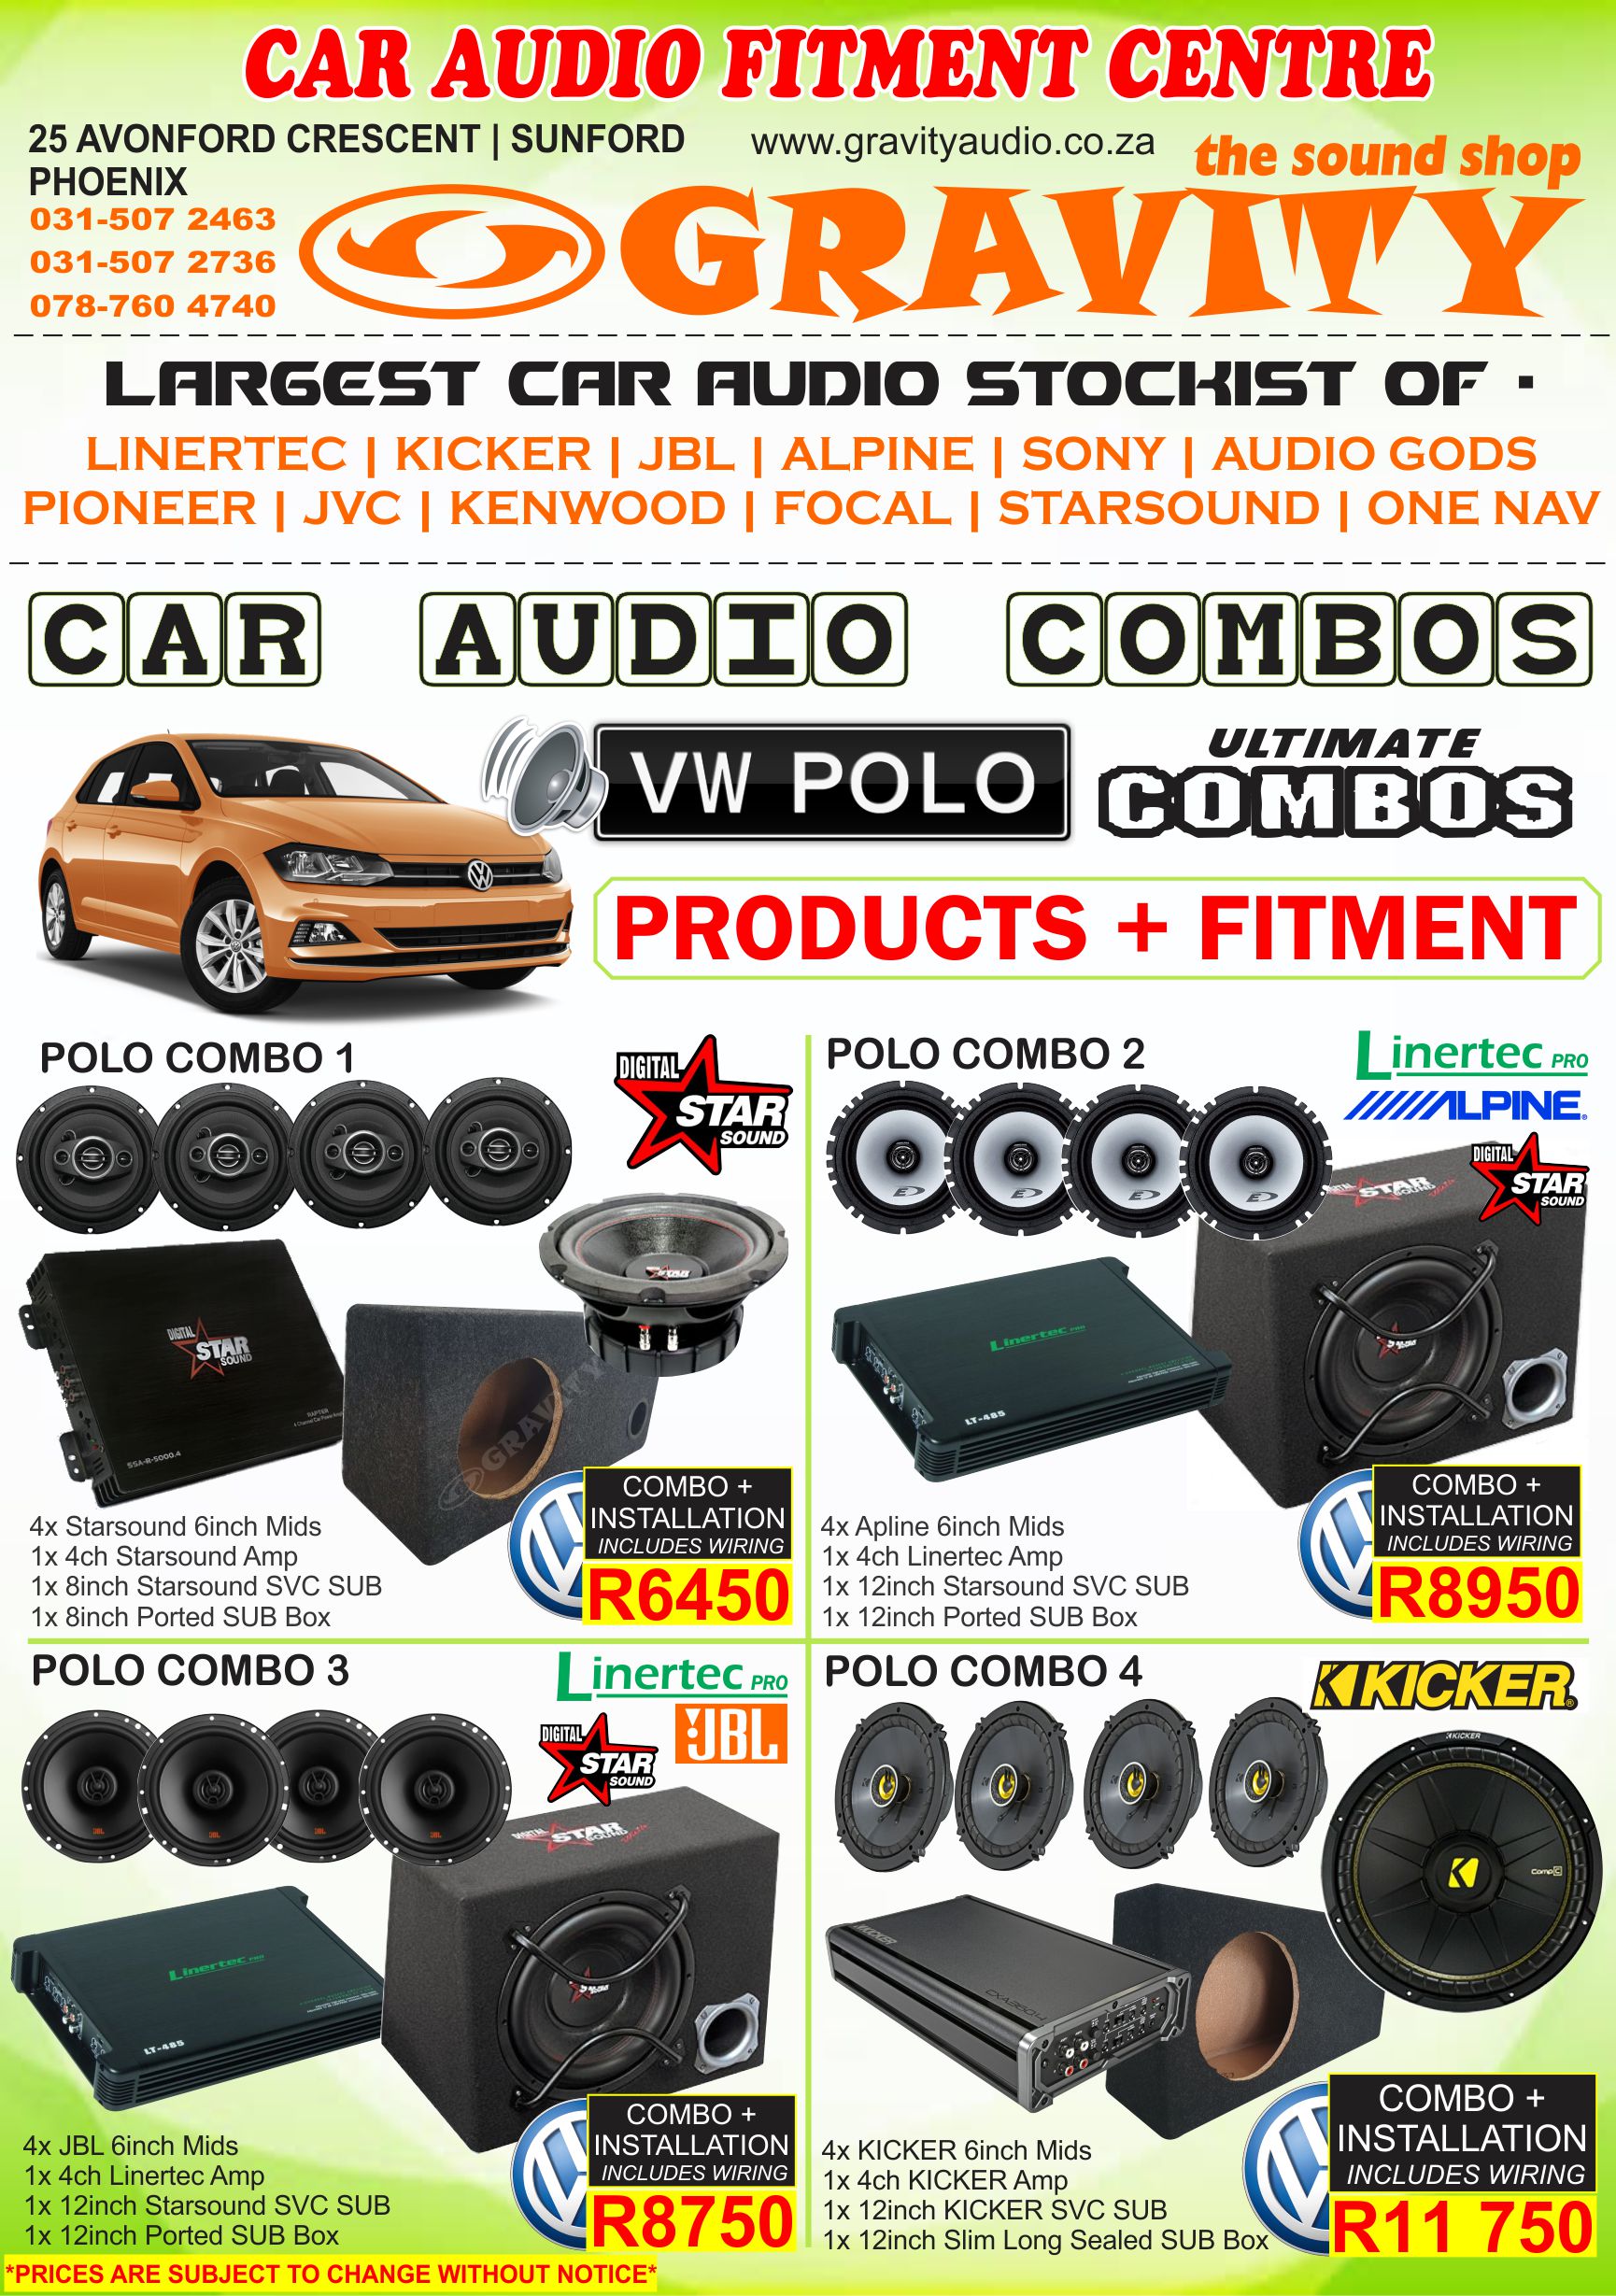 car audio combo , car audio equipment , sony , pioneer ,jvc , kicker , targa , xtc , jbl . starsound  | car audio durban | car audio fitment durban | dj sound durban | disco dj pa equipment durban | disco dj lighting durban | dj mixer durban | dj power amp durban | tv box durban | air mouse durban | behringer durban | gravity sound and lighting warehouse durban | dj smoke achine durban | dj smoke fluid durban | disco dj lighting durban | disco dj led lighting durban | disco dj lazer lighting durban | car amps durban | car decks durban | car bluetooth decks durban | car van double dins durban | car subs durban | starsound grey cones subwoofers durban | Car accessories durban | disco dj party combos durban | J EQUIPMENT | DISCO DJ LIGHTING | DJ/PA COMBO PACKAGES | MULITIMEDIA | MOBILE DISCO-DJ FOR HIRE  SOUND EQUIPMENT HIRE | PROJECTOR AND SCREEN FOR HIRE | ELECTRONIC REPAIR CENTRE  GHD HAIR IRON REPIARS-CLOUD NINE | PUBLIC ADDRESS SYSTEMS | PA DESK MIXERS  SANITIZER FOGGING MACHINES | POWER AMPLIFER | CROSSOVER / EQUALIZER | DISCO / PA SPEAKERS  HOME THEATRE SYSTEMS | SANITIZER SMOKE MACHINE | DJ MIXERS | DJ ACCESSORIES  DJ CD / MP3 PLAYERS / MIDI CONTROLLERS | DISCO BOXES | MICROPHONES | CAR AUDIO | CAR AUDIO FITMENT  SANITIZER THERMAL FOGGER MACHINES | CAR ACCESSORIES | CAR SPEAKERS | CAR AMPLIFIERS | CAR SOUND FITMENT  MARINE AUDIO |DISCO LIGHTING FOR HIRE ,SOUND EQUIPMENT FOR HIRE ,PROJECTOR / SCREEN / STAGE FOR HIRE ,COLOUR WASH HIRE,MOOD LIGHTING HIRE ,INTELLIGENT LIGHTING HIRE , OUTDOOR LANTERN HIRE , DJ SOUND FOR HIRE , CONFETTI HIRE , ROSE PETAL HIRE , SMOKE MACHINE HIRE , UV LIGHITNG HIRE DURBAN , SOUND AND LIGHTING HIRE DURBAN    